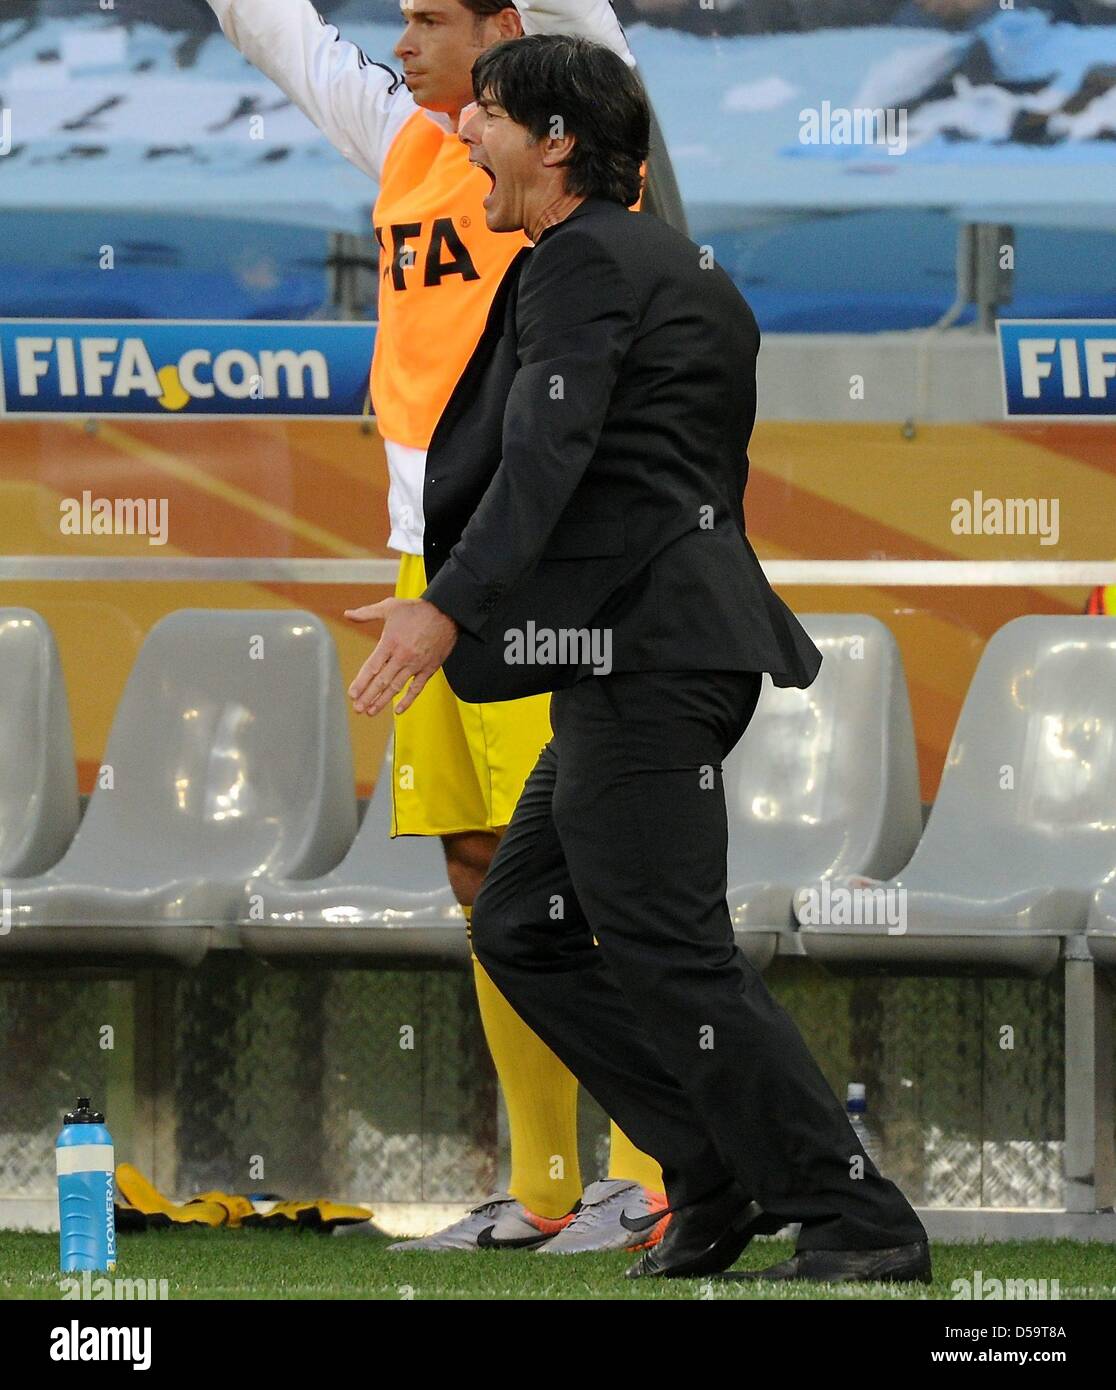 Germany's coach Joachim Loew celebrates during the 2010 FIFA World Cup quarterfinal match between Argentina and Germany at the Green Point Stadium in Cape Town, South Africa 03 July 2010. Photo: Marcus Brandt dpa - Please refer to http://dpaq.de/FIFA-WM2010-TC  +++(c) dpa - Bildfunk+++ Stock Photo